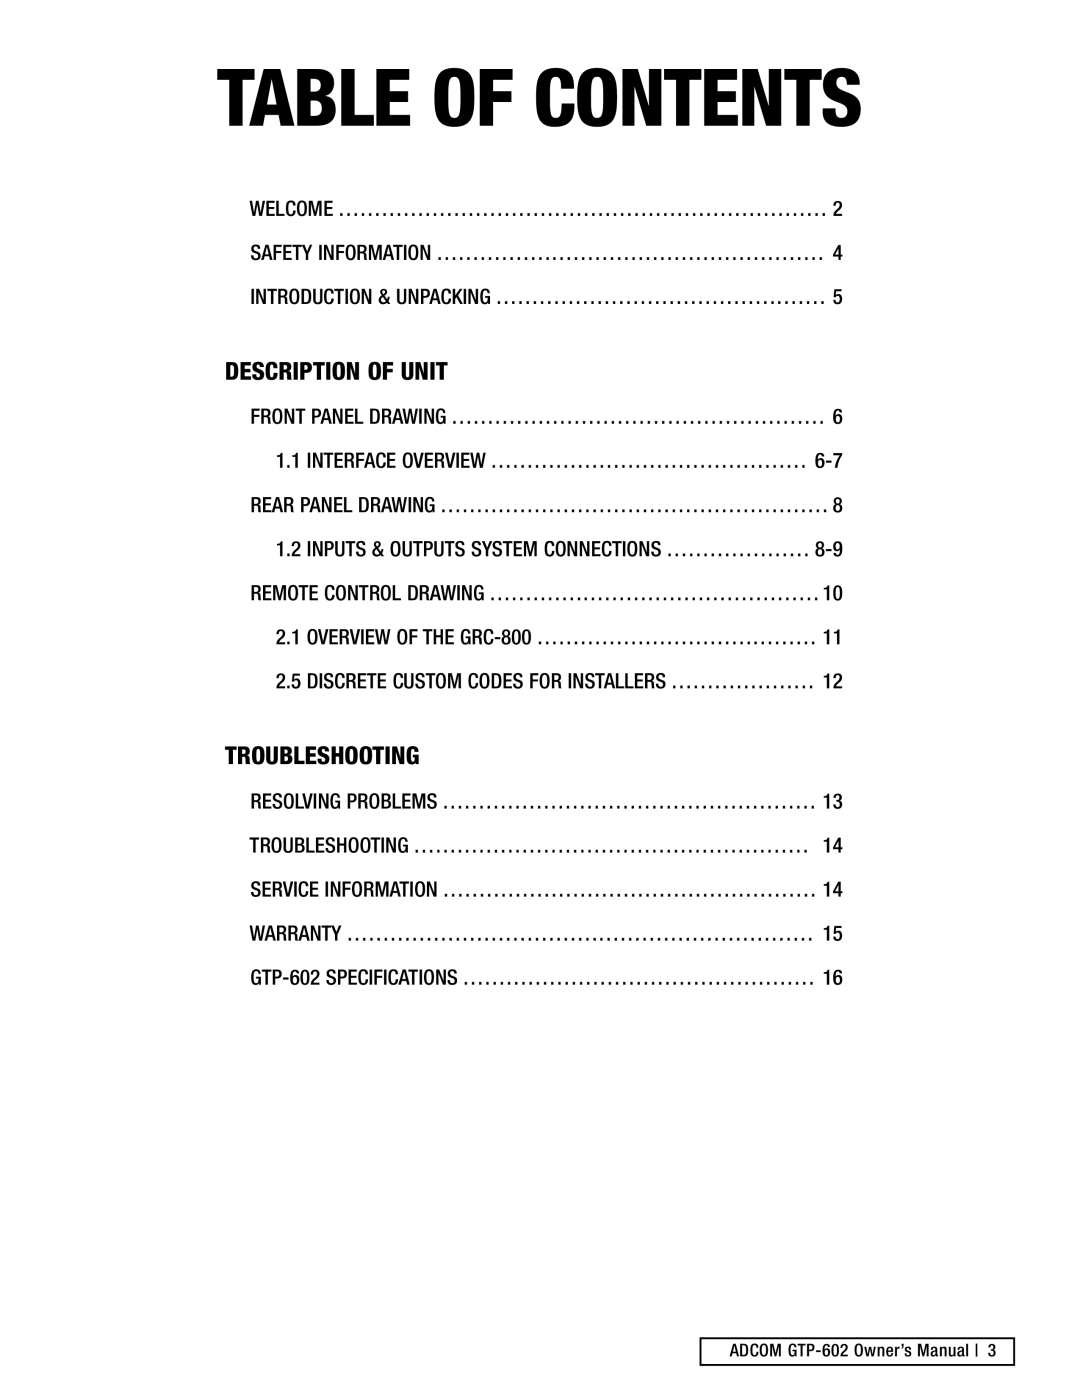 Adcom GTP-602 manual Table Of Contents, Description Of Unit, Troubleshooting 